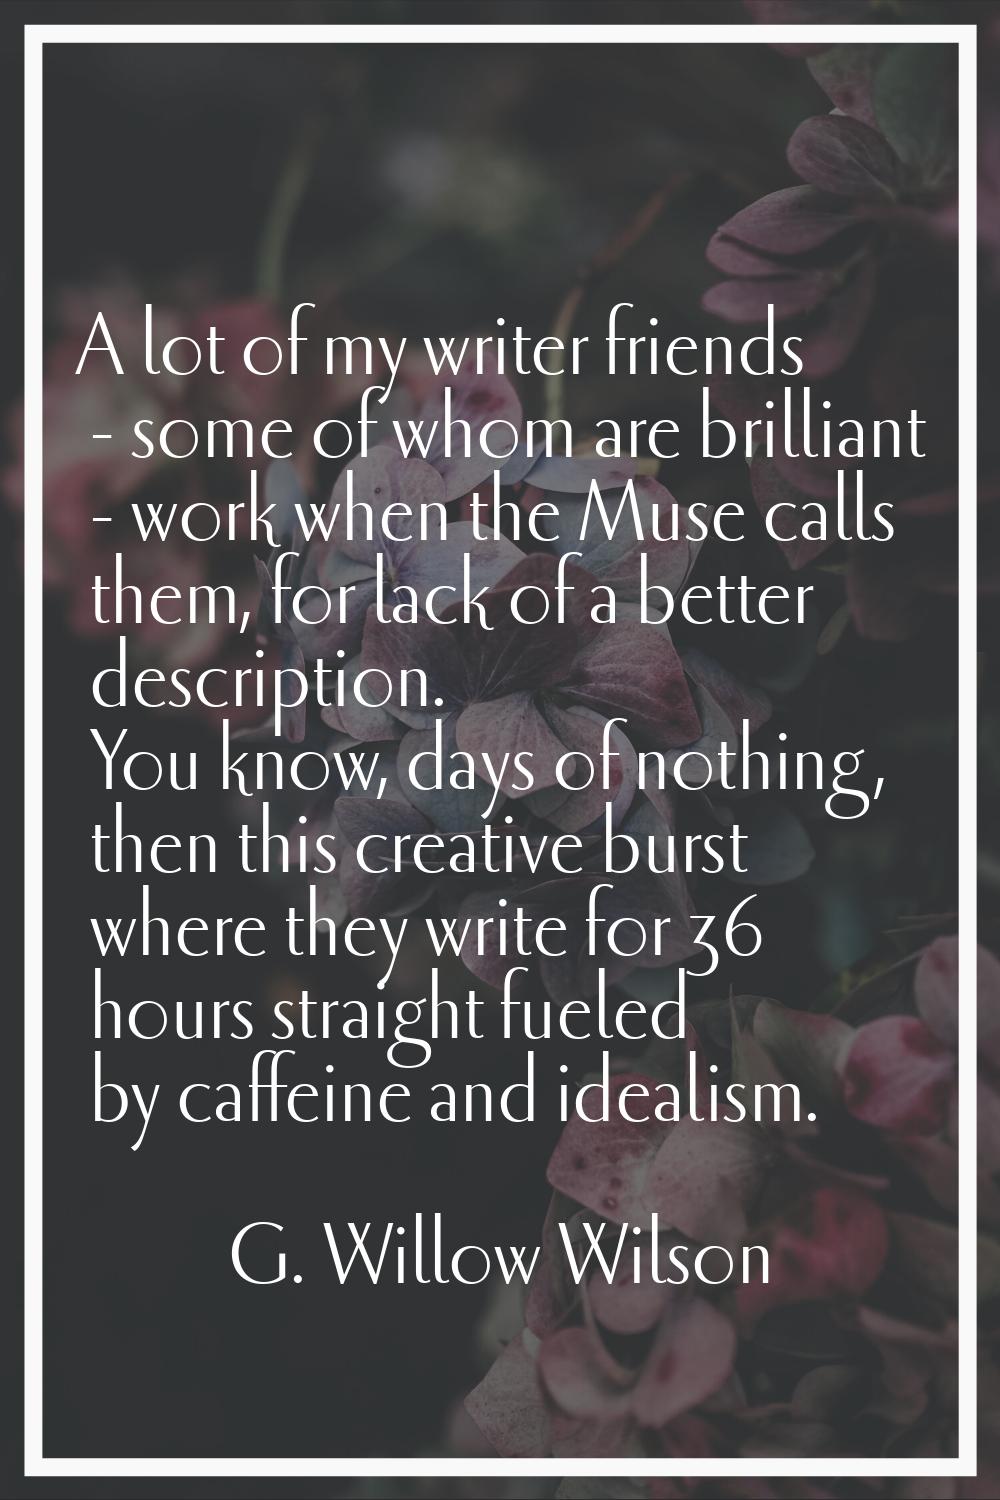 A lot of my writer friends - some of whom are brilliant - work when the Muse calls them, for lack o